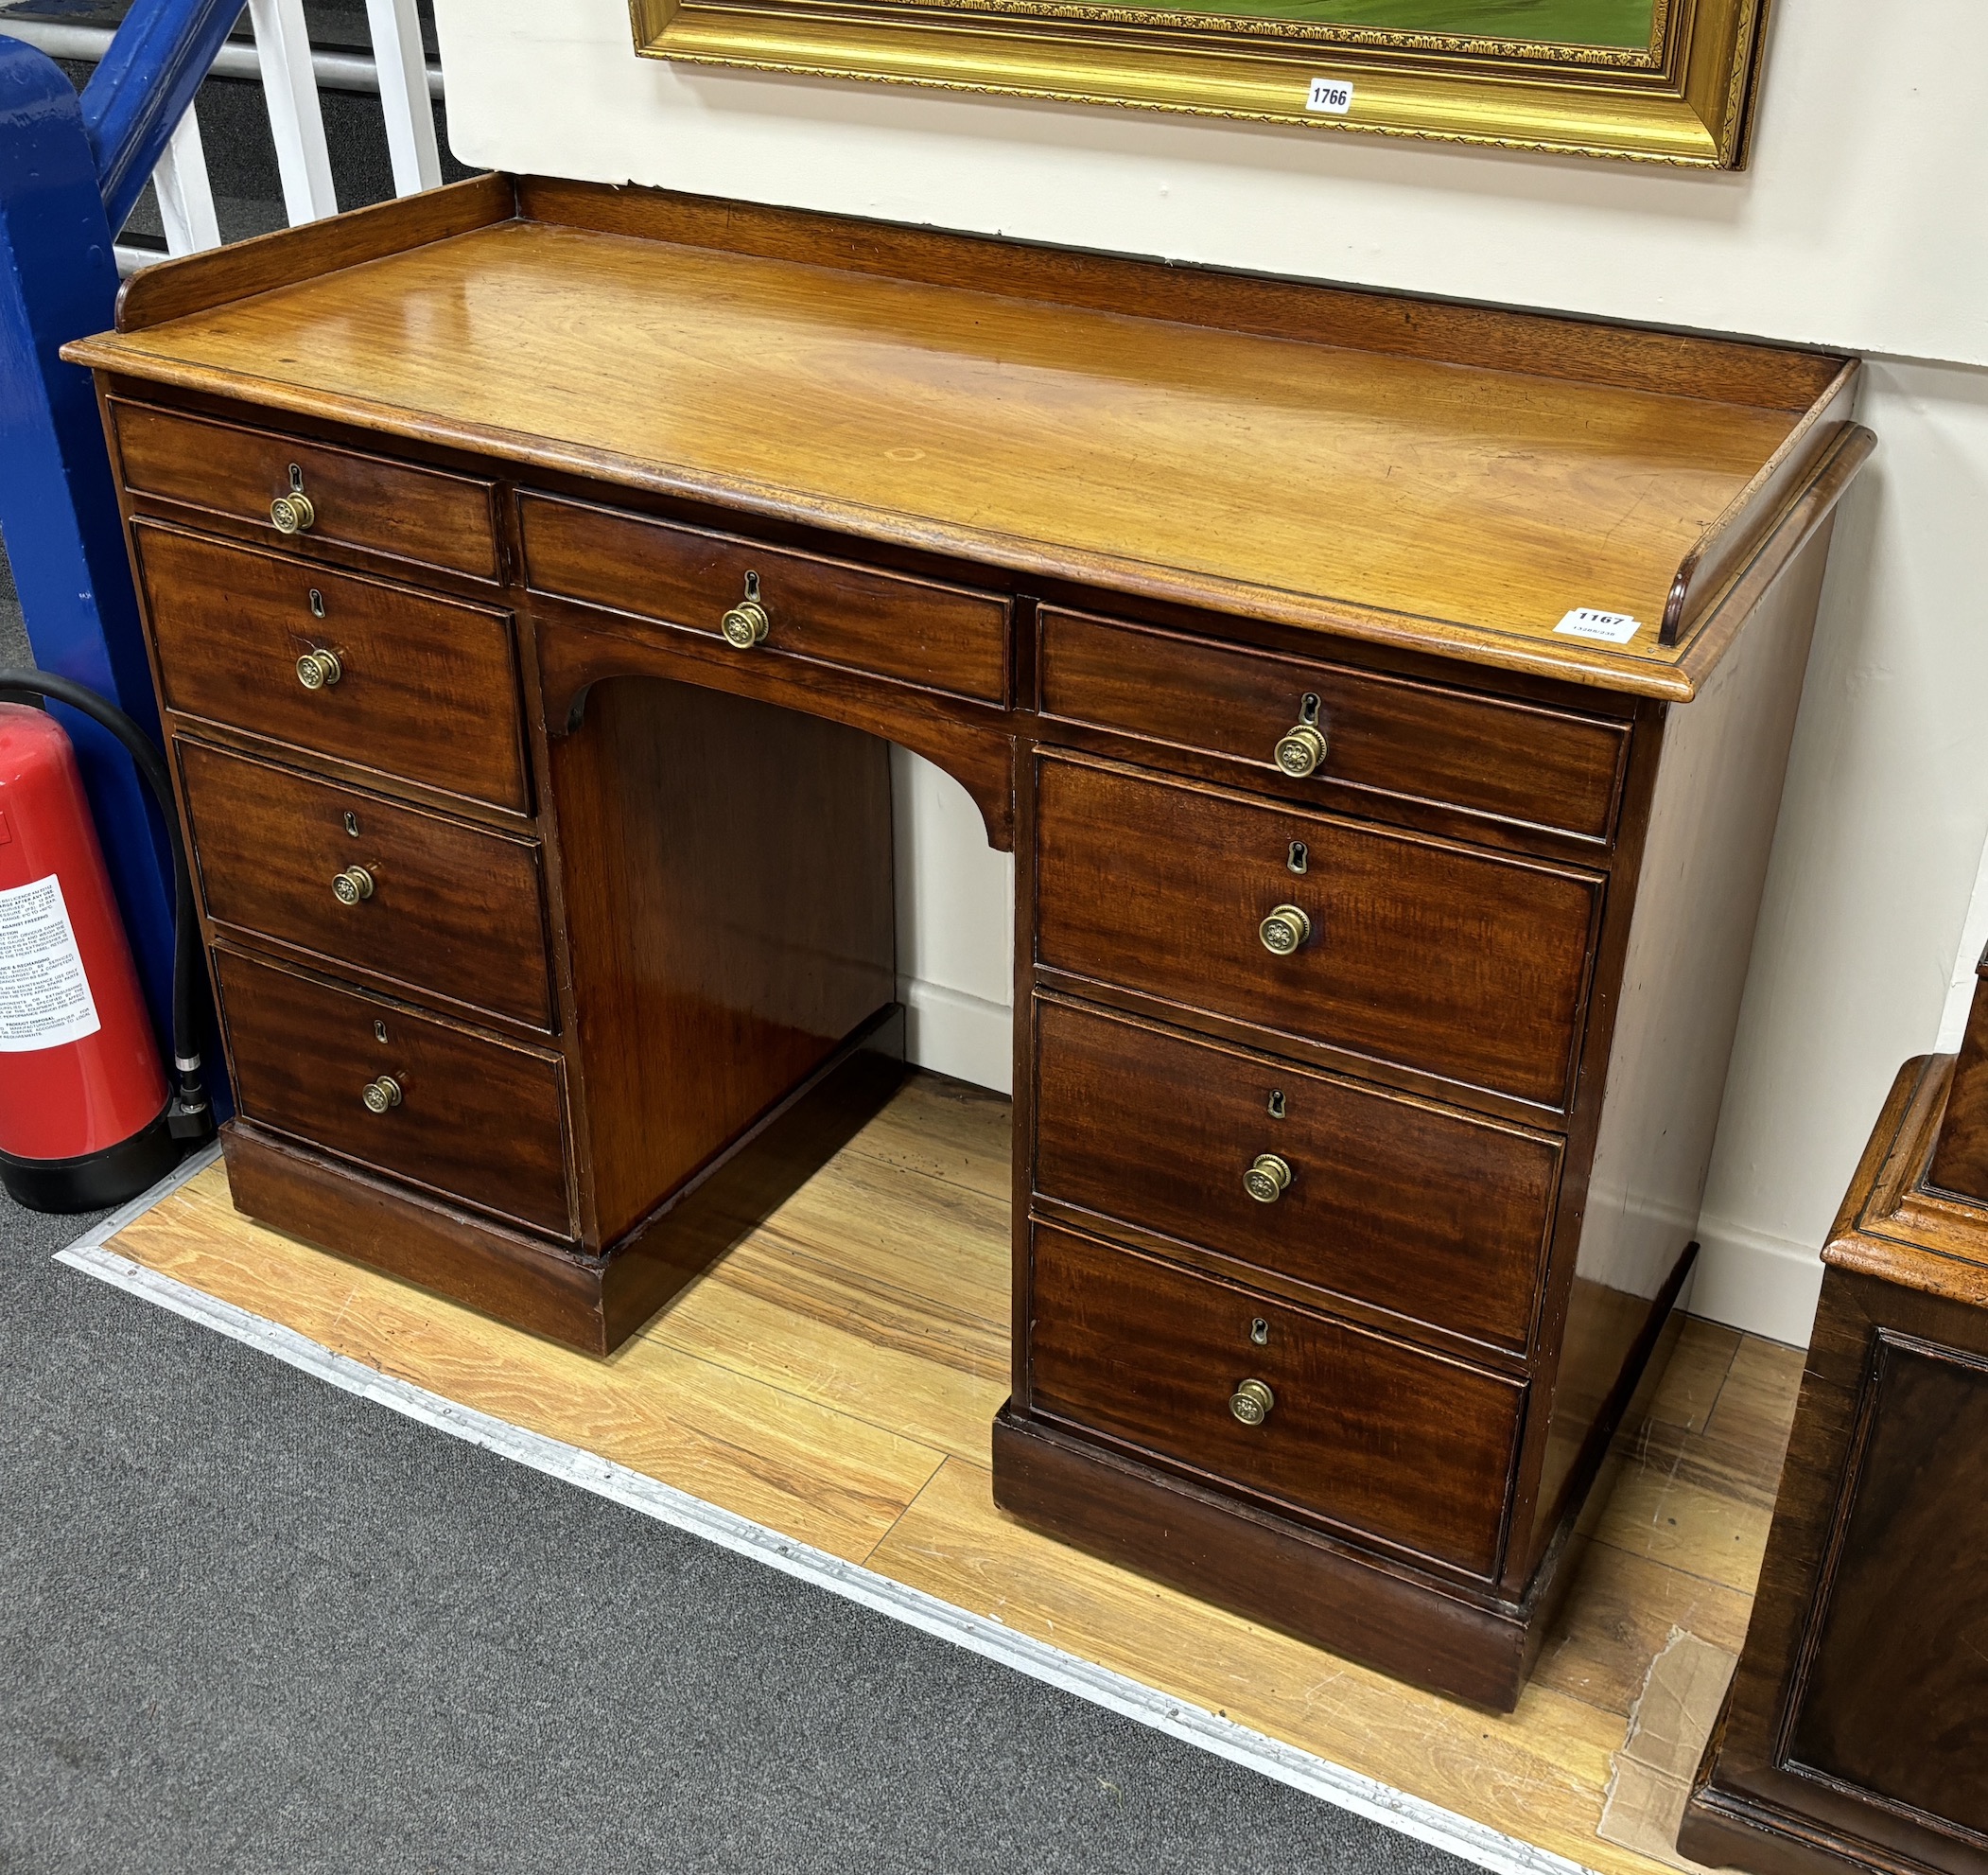 An early 19th century mahogany kneehole dressing table, width 121cm, depth 51cm, height 85cm